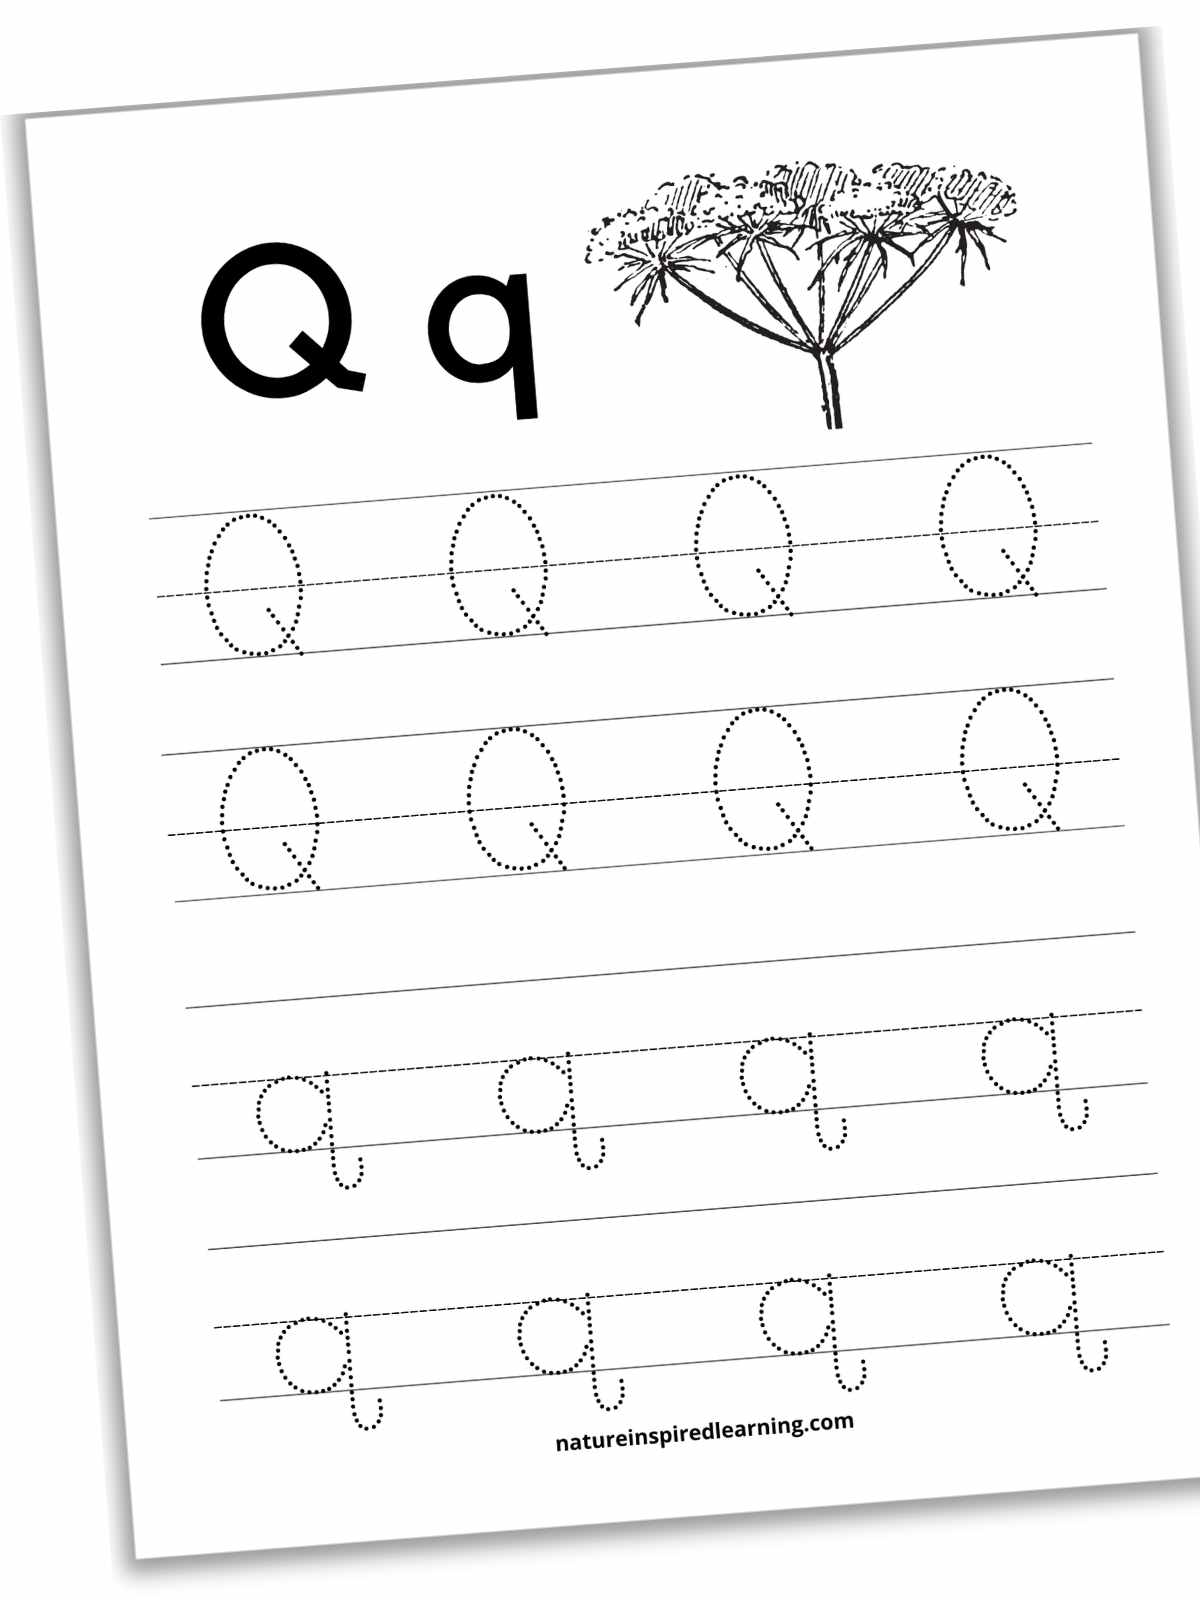 Worksheet with uppercase and lowecase q's in dotted font with queen Anne's lace at the top